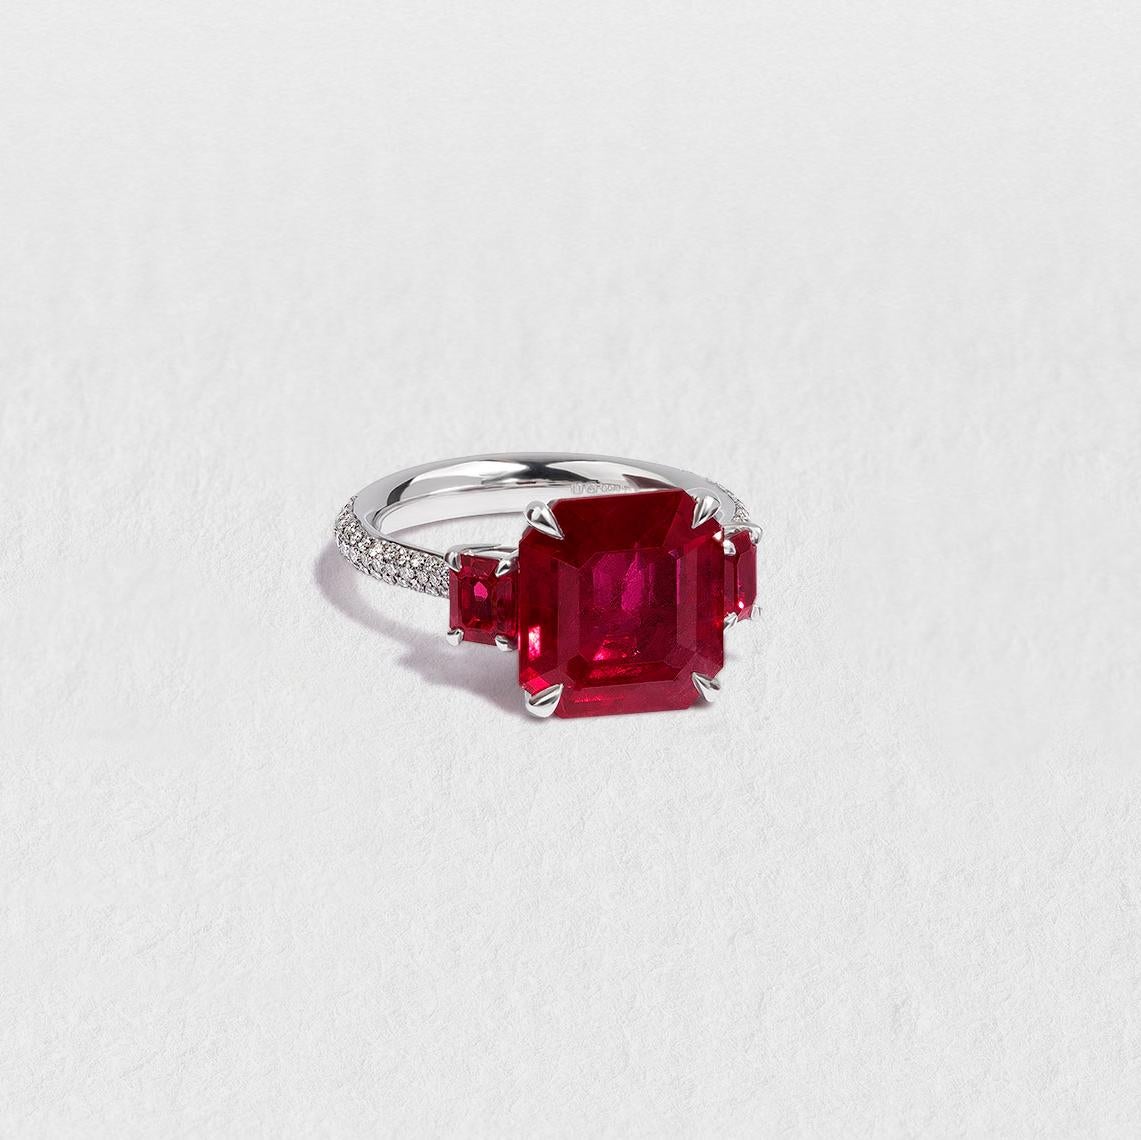 This peerless three-stone ring is truly unforgettable thanks to its commanding centre ruby, made rare by its large size. Mined and cut in Thailand, the breathtaking stone is shouldered by two smaller rubies, also from Thailand. All three stones are